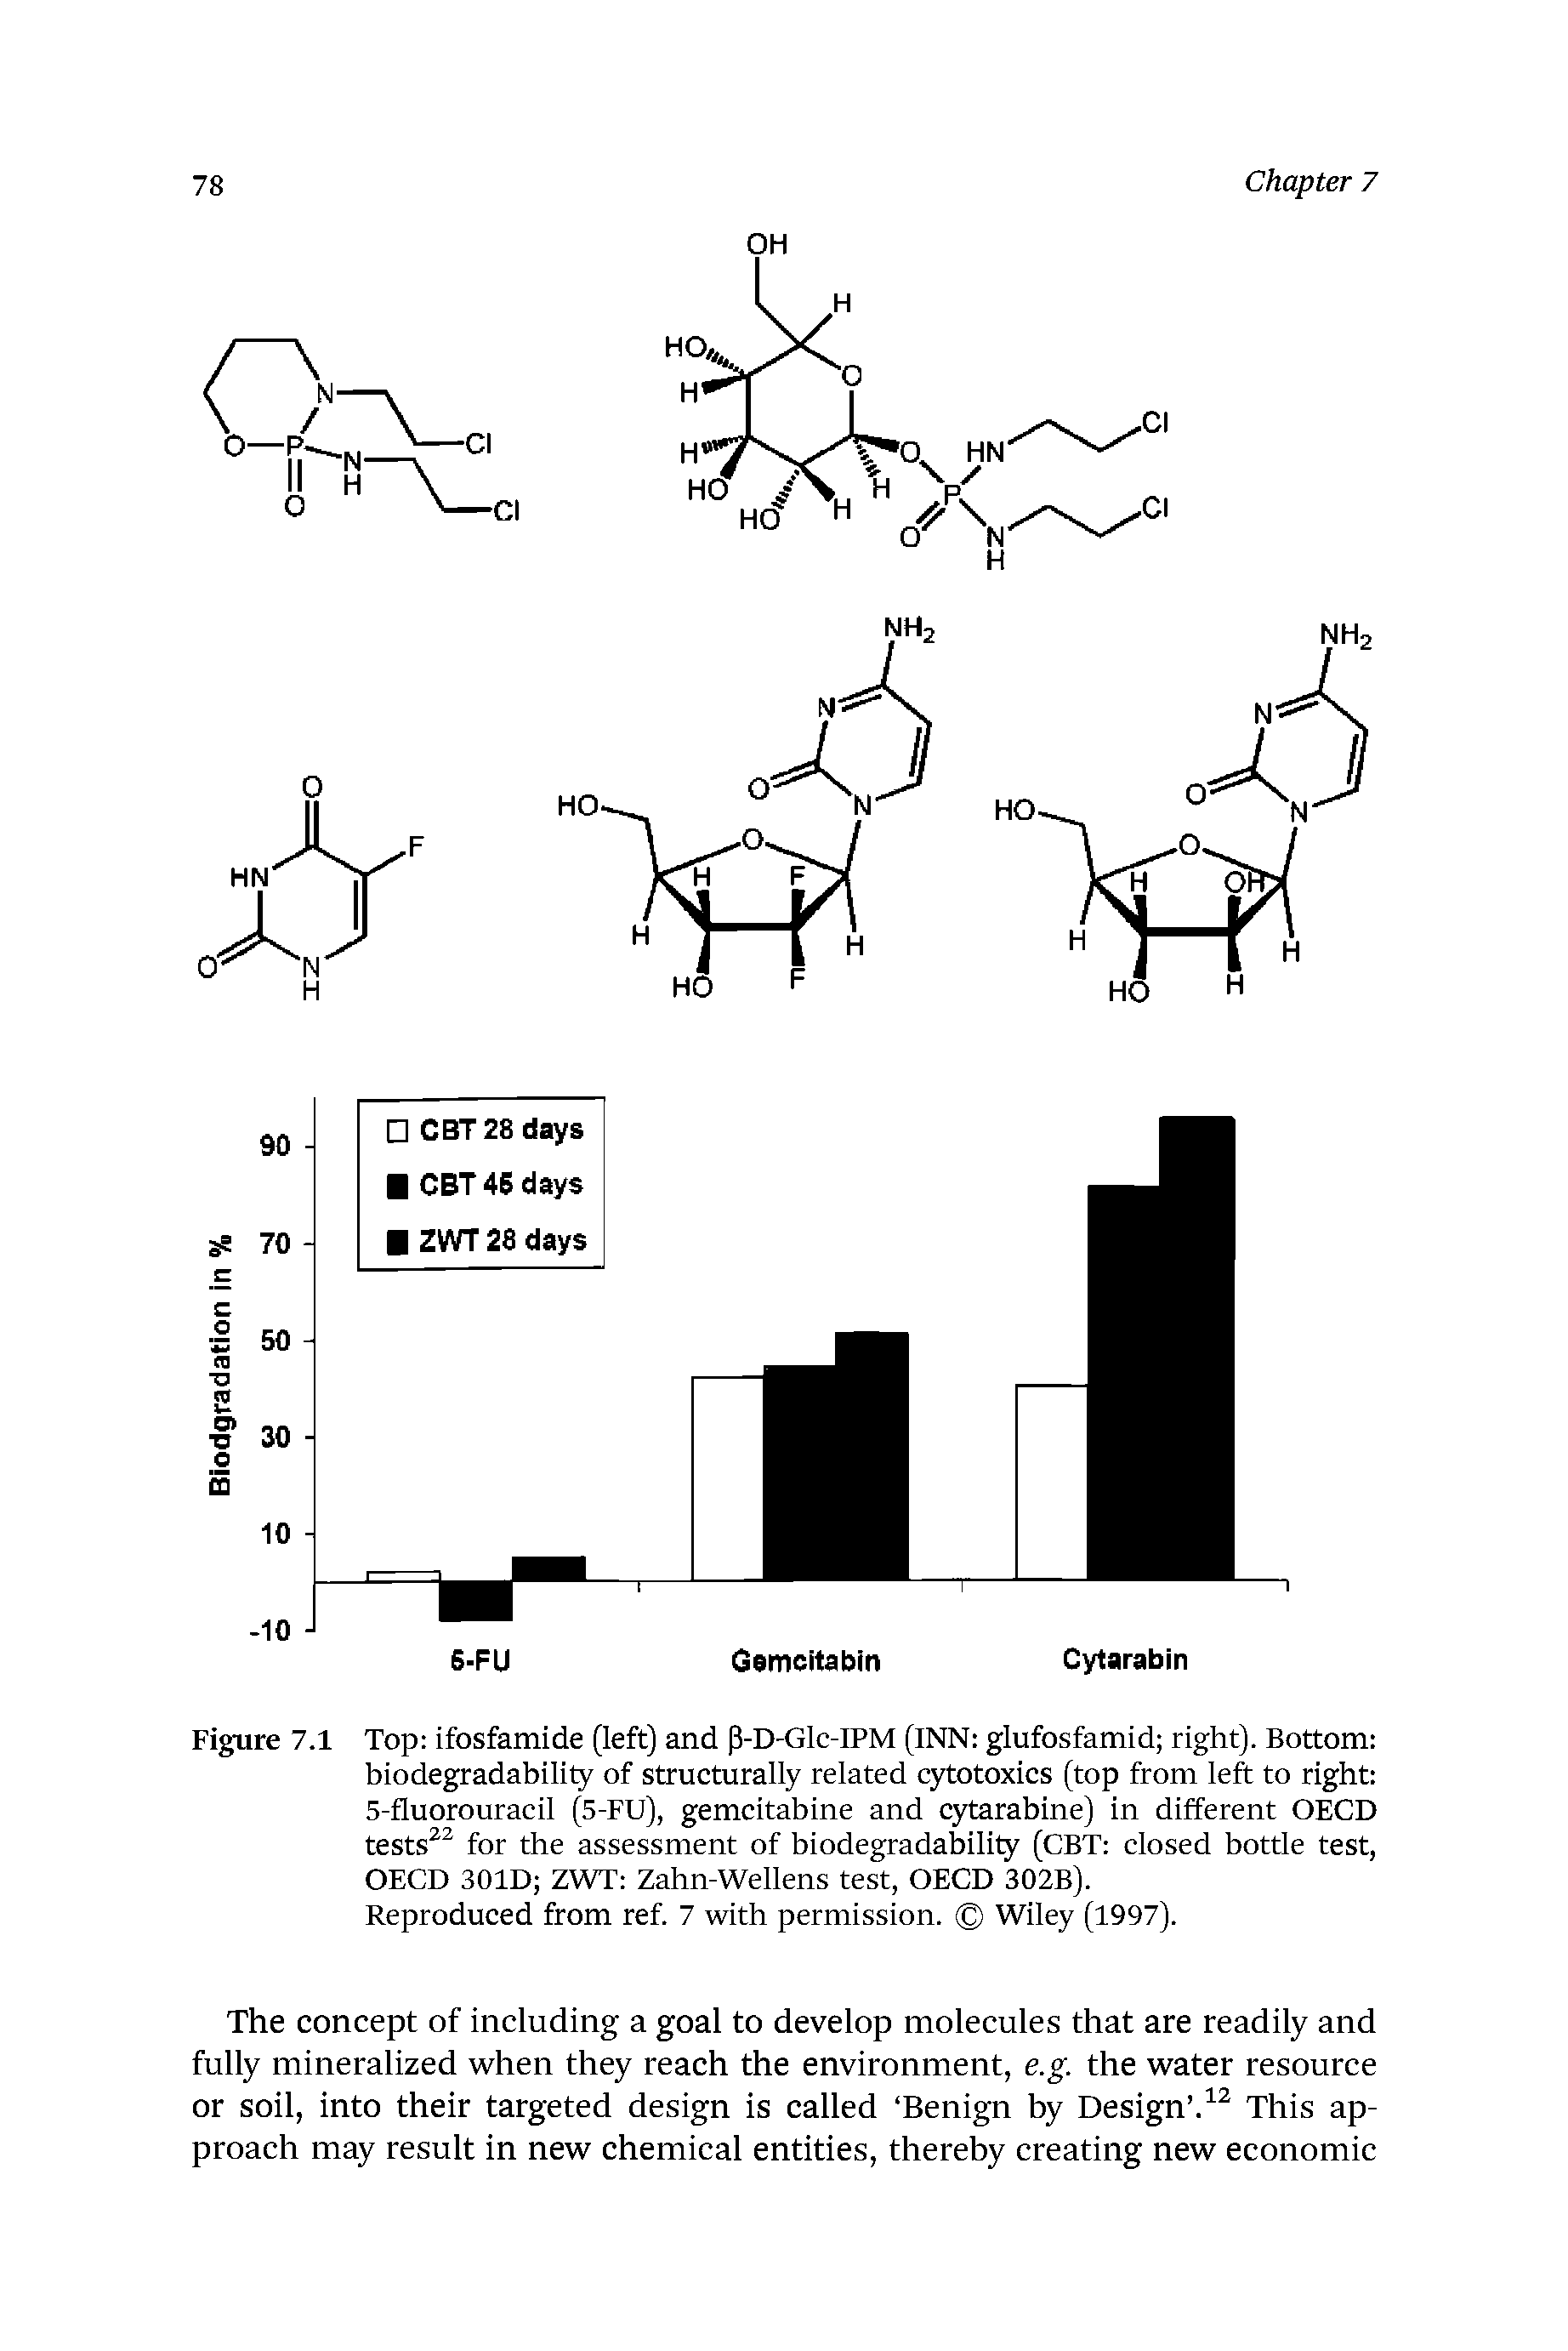 Figure 7.1 Top ifosfamide (left) and p-D-Clc-IPM (INN glufosfamid right). Bottom biodegradability of structurally related cytotoxics (top from left to right 5-fluorouracil (5-FU), gemcitabine and qftarabine) in different OECD tests for the assessment of biodegradability (CBT closed bottle test, OECD 301D ZWT Zahn-Wellens test, OECD 302B).